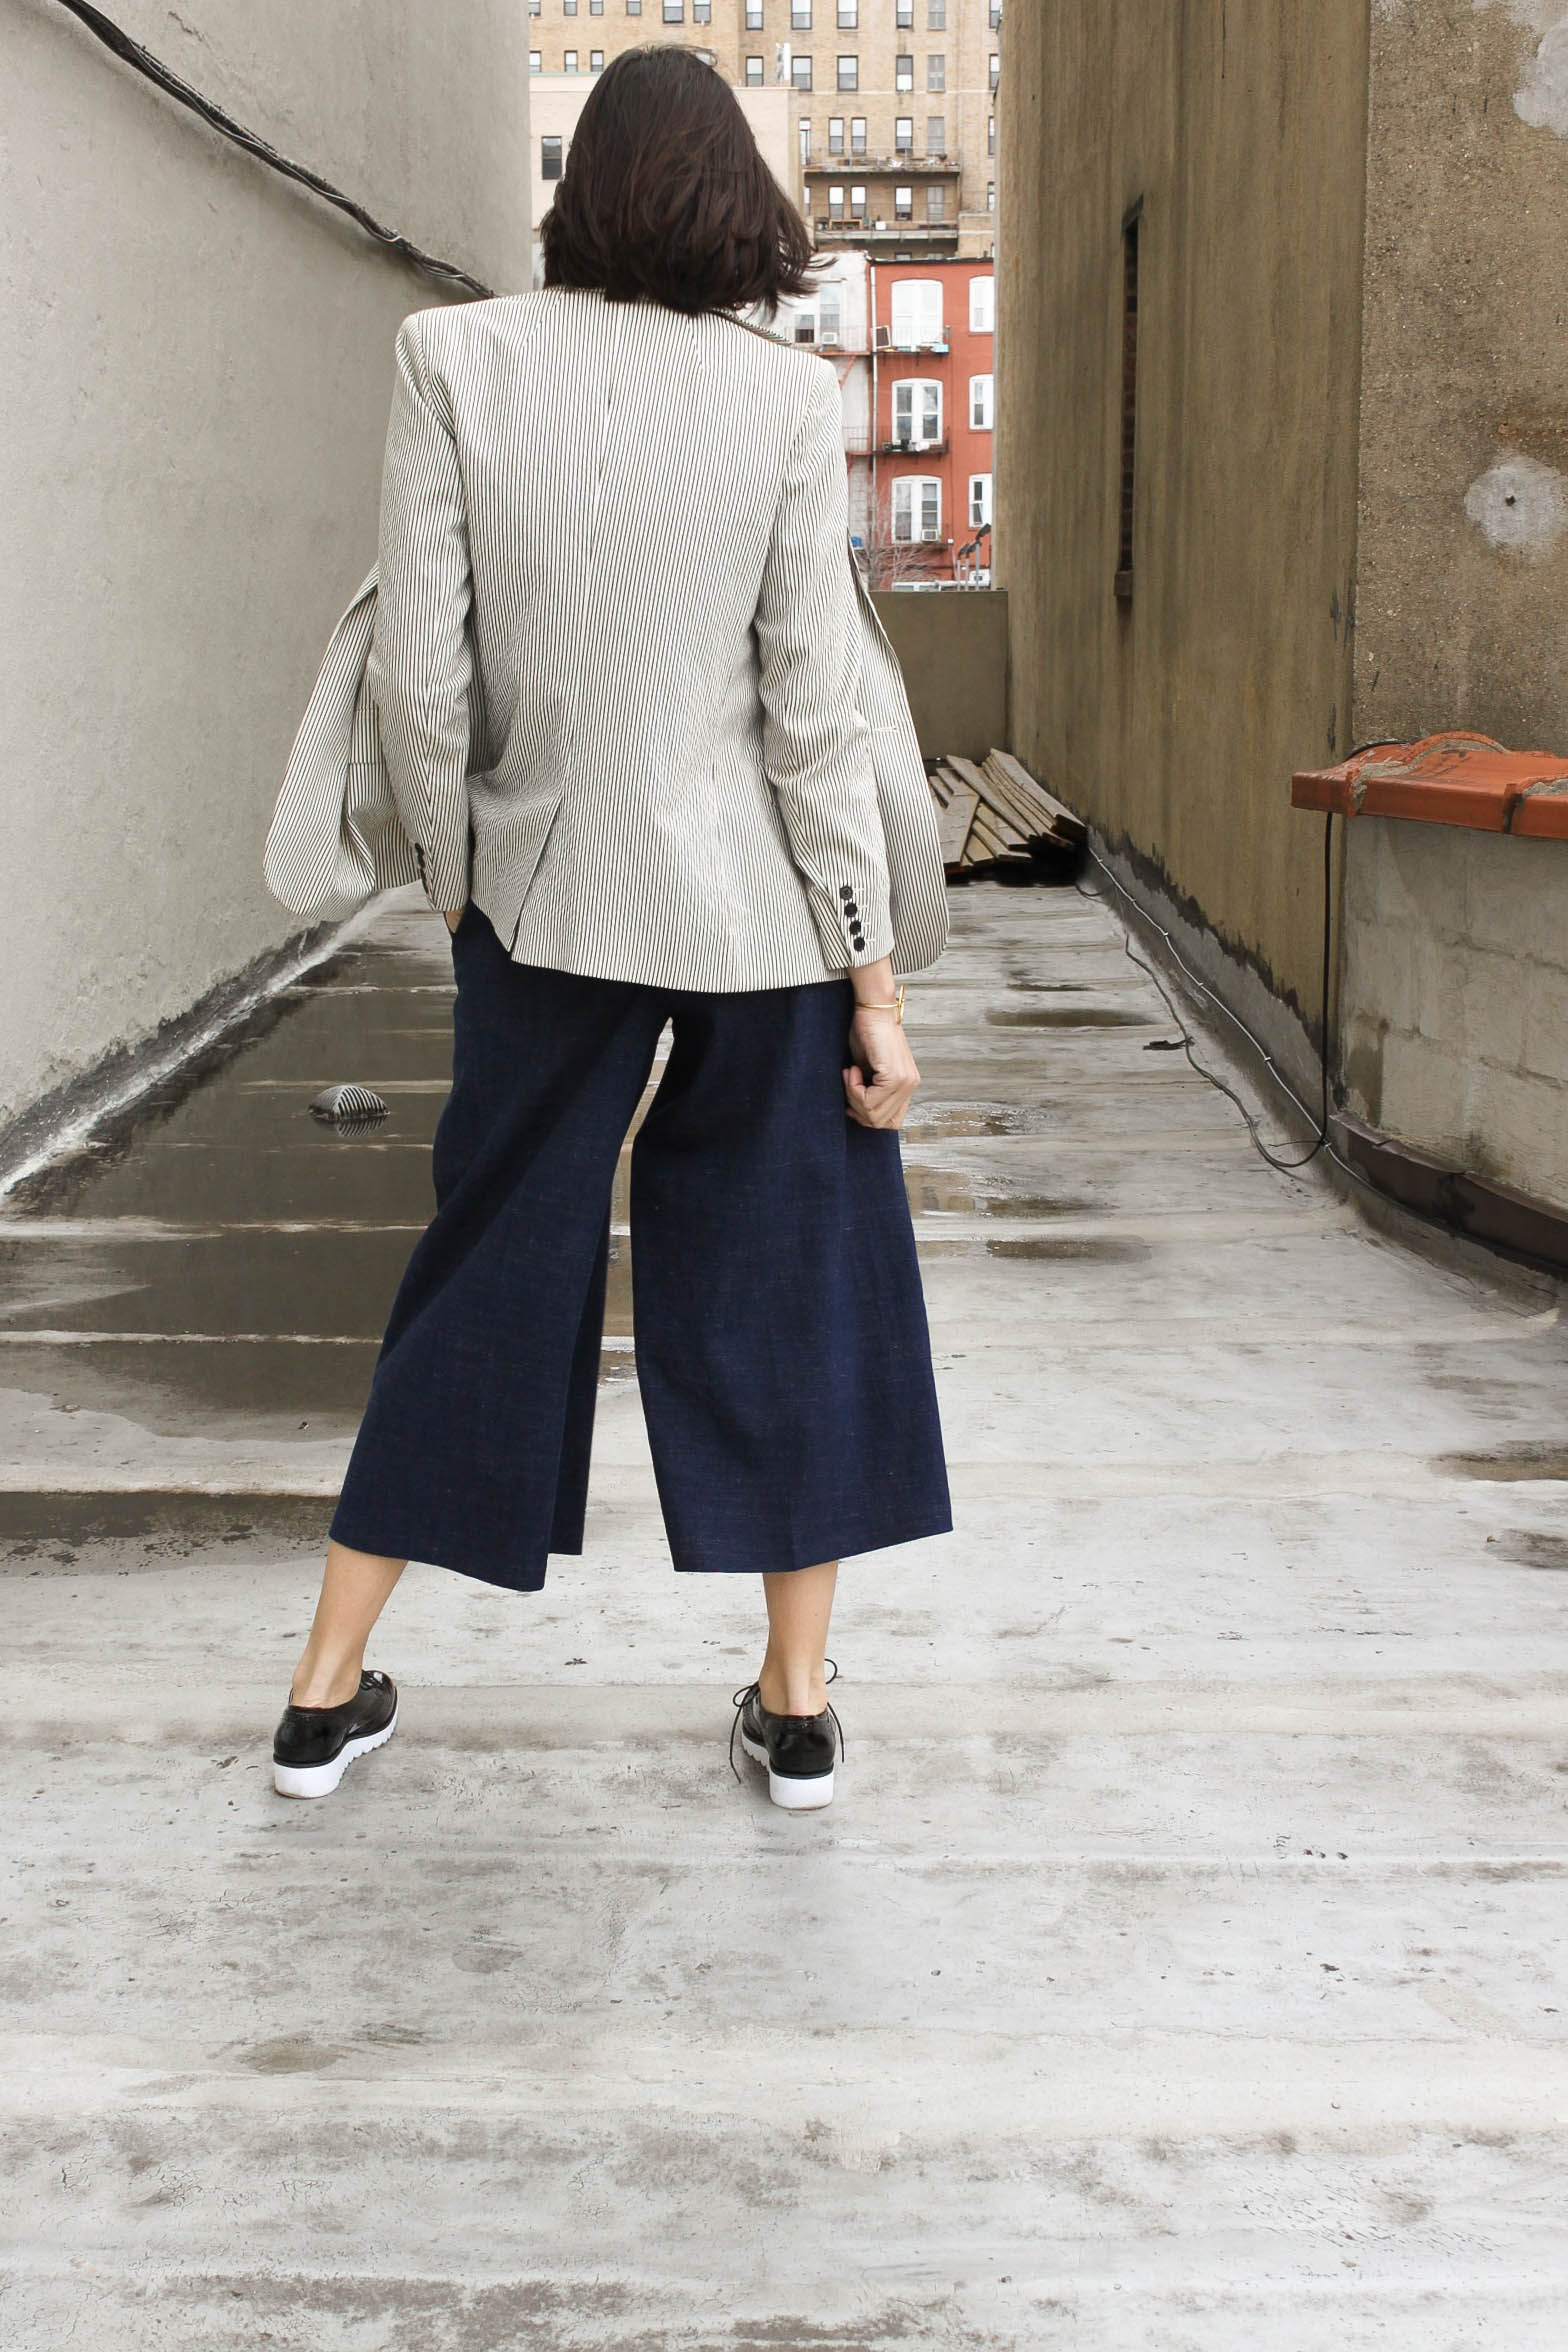 Winter culottes stylin' — Noble & Daughter